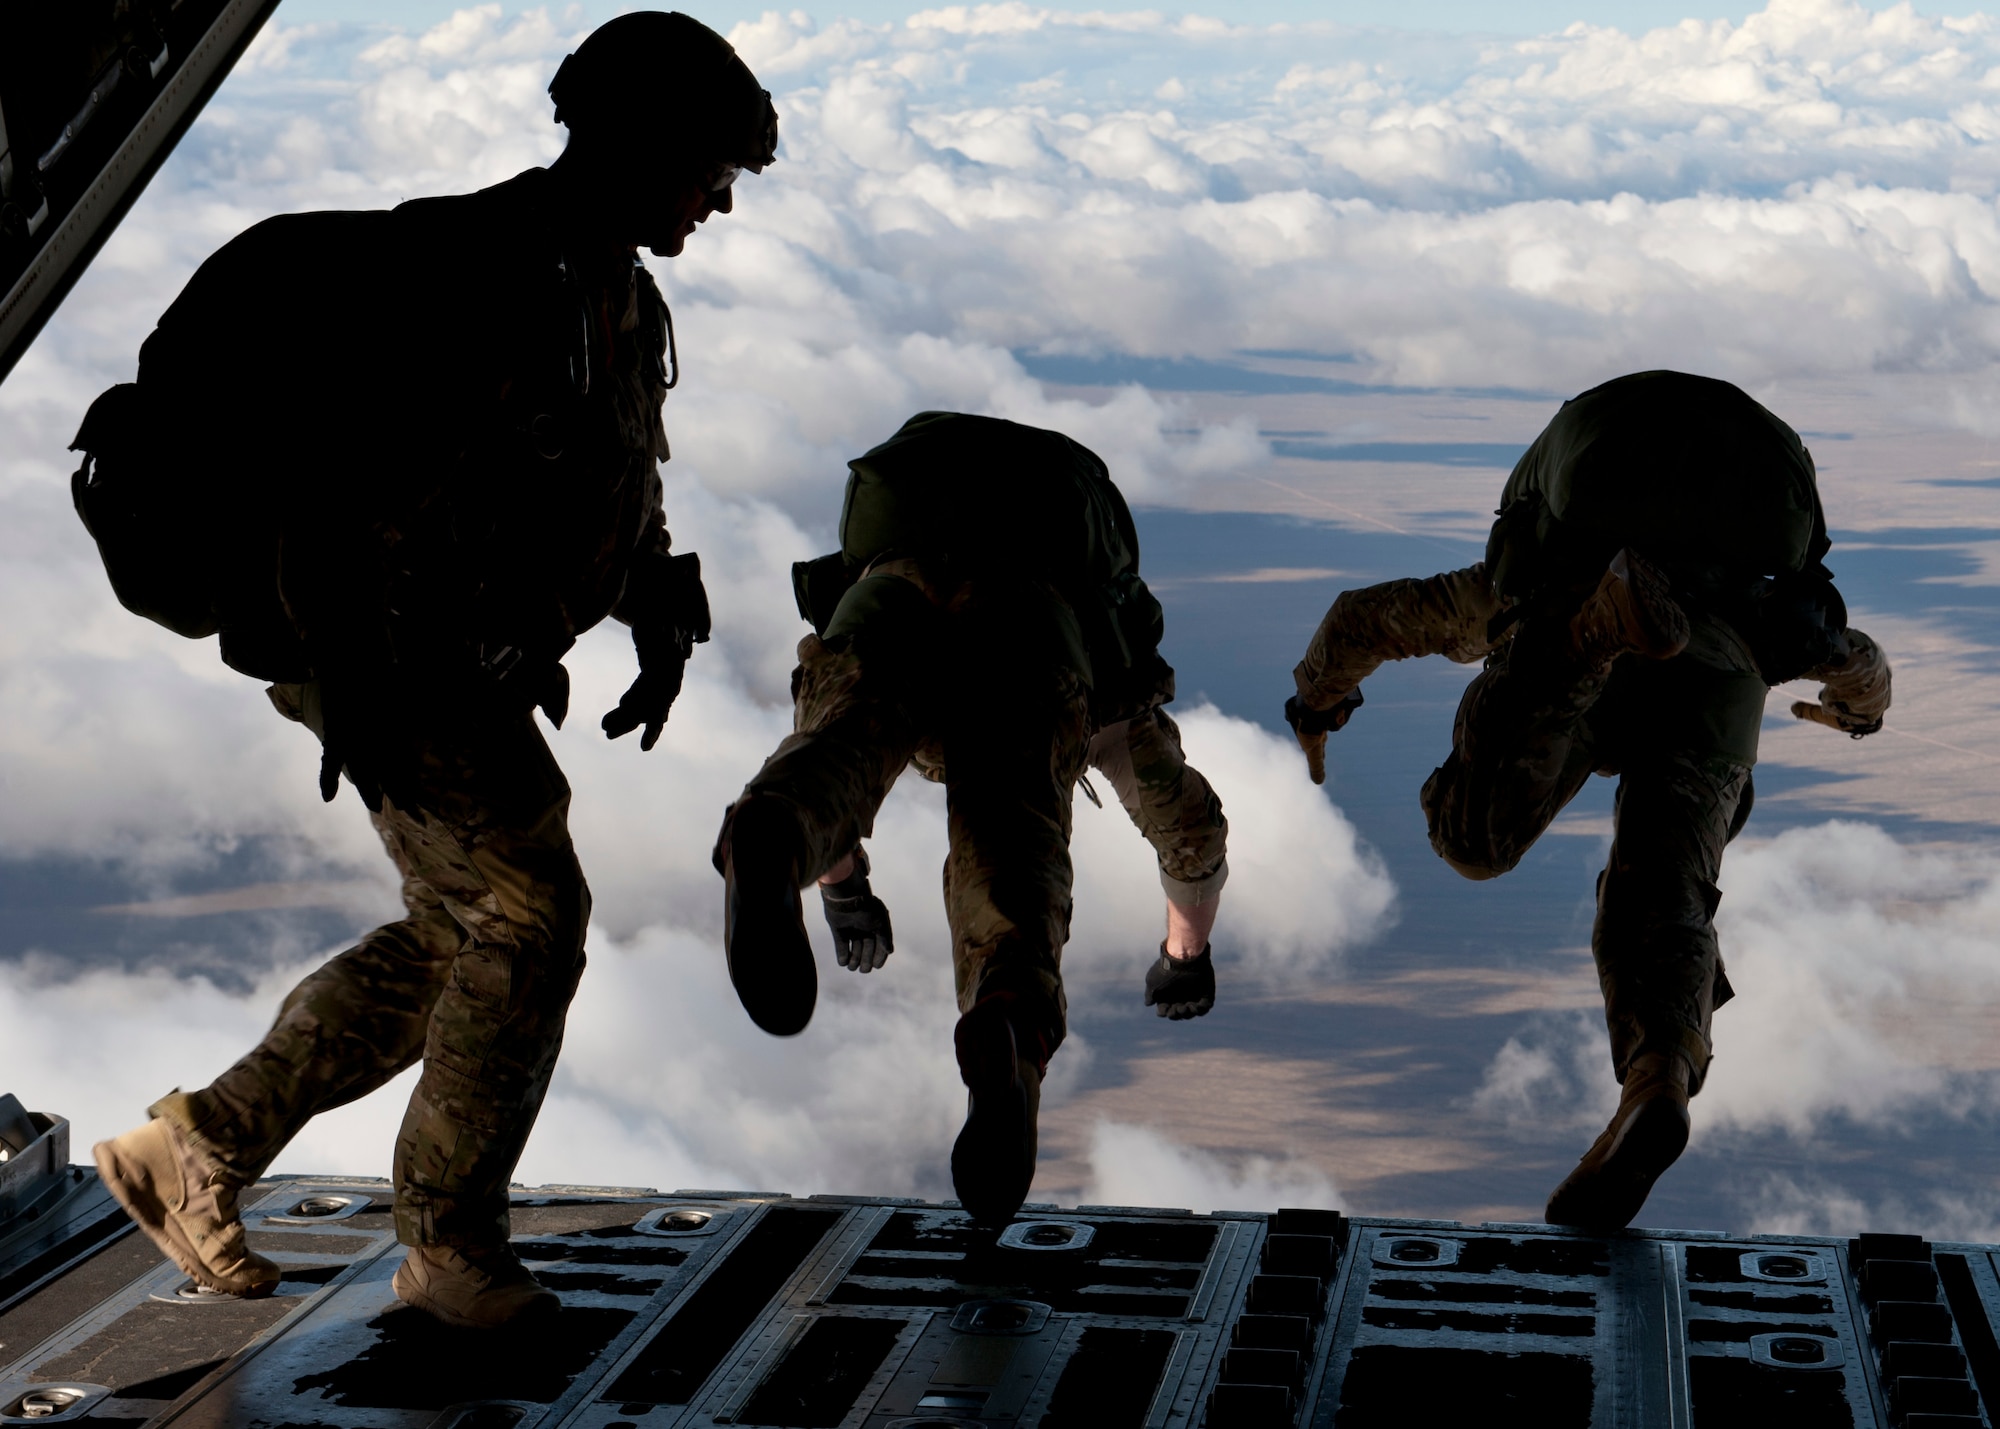 U.S Army Long Range Surveillance paratroopers and a U.S. Air Force Joint Terminal Attack Controller preform a High Altitude Low Opening jump during the U.S. Air Force Weapons School's Joint Forcible Entry Exercise 14B over the Nevada Test and Training Range Dec. 4, 2014. Joint service exercises such as JFEX help to maintain mission readiness and effectiveness for future real-world joint-service operations. (U.S. Air Force photo by Senior Airman Thomas Spangler)